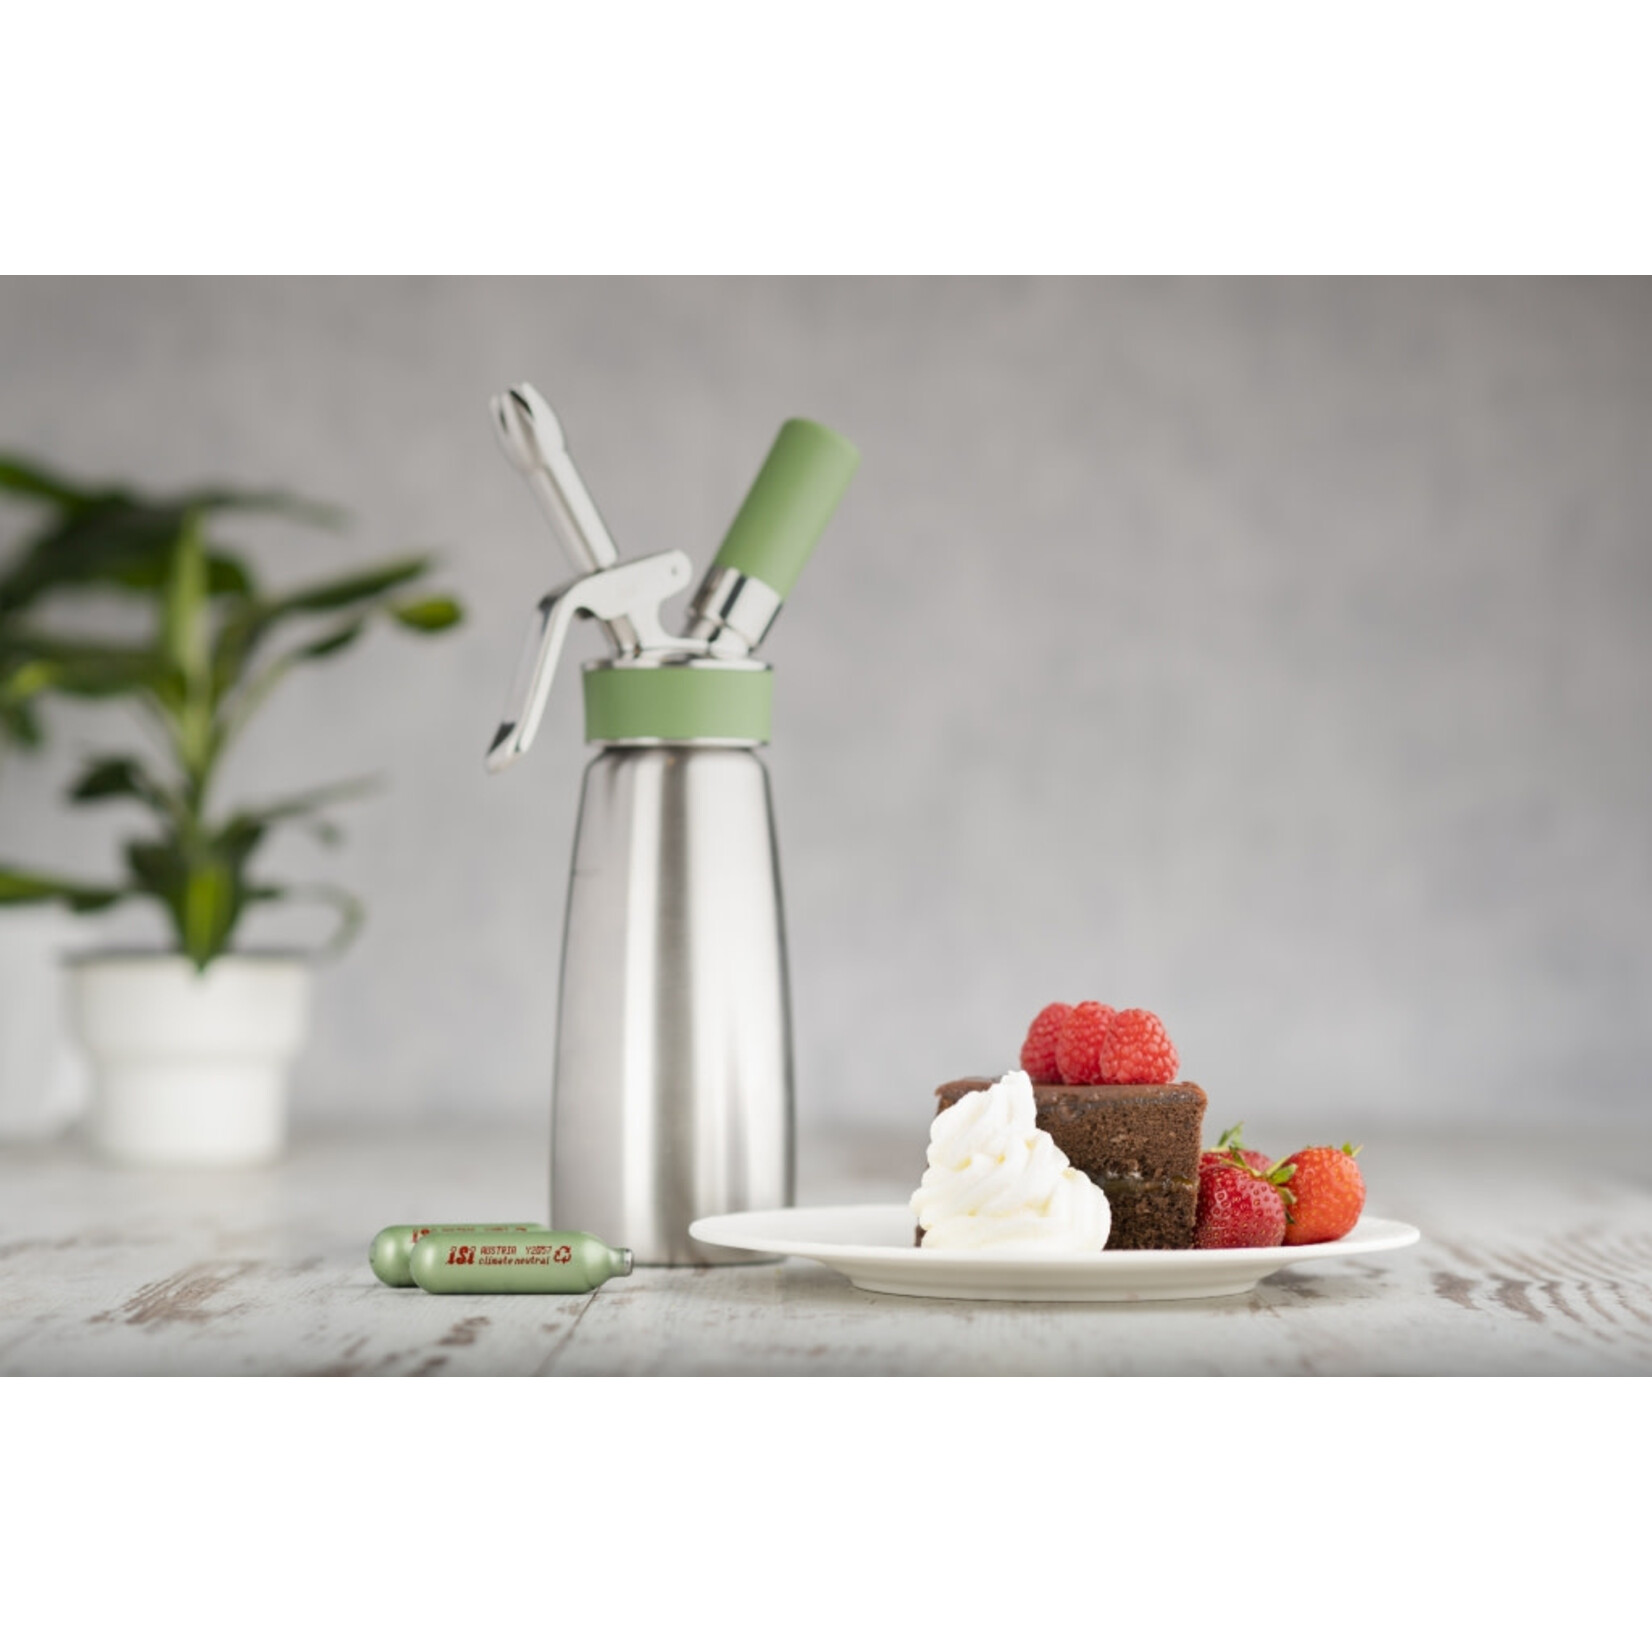 iSi Culinary Whip 500 ml 100 % klimaat neutrale iSi Green Whip iSi Green Whip 500 ml  iSi 0.5 liter iSi 1661